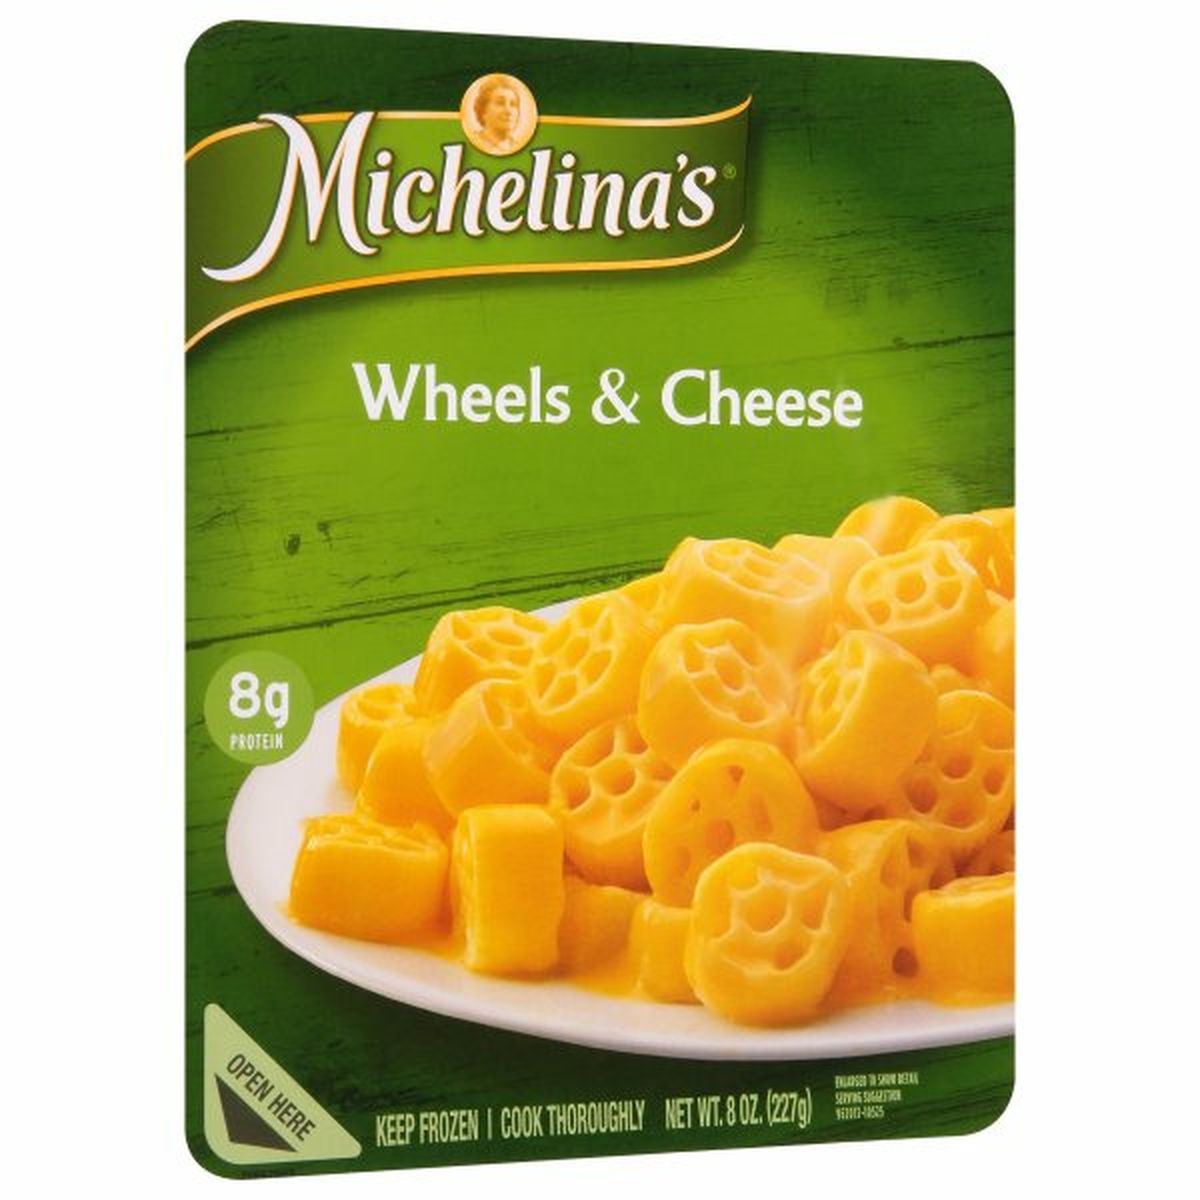 Calories in Michelina's Wheels & Cheese